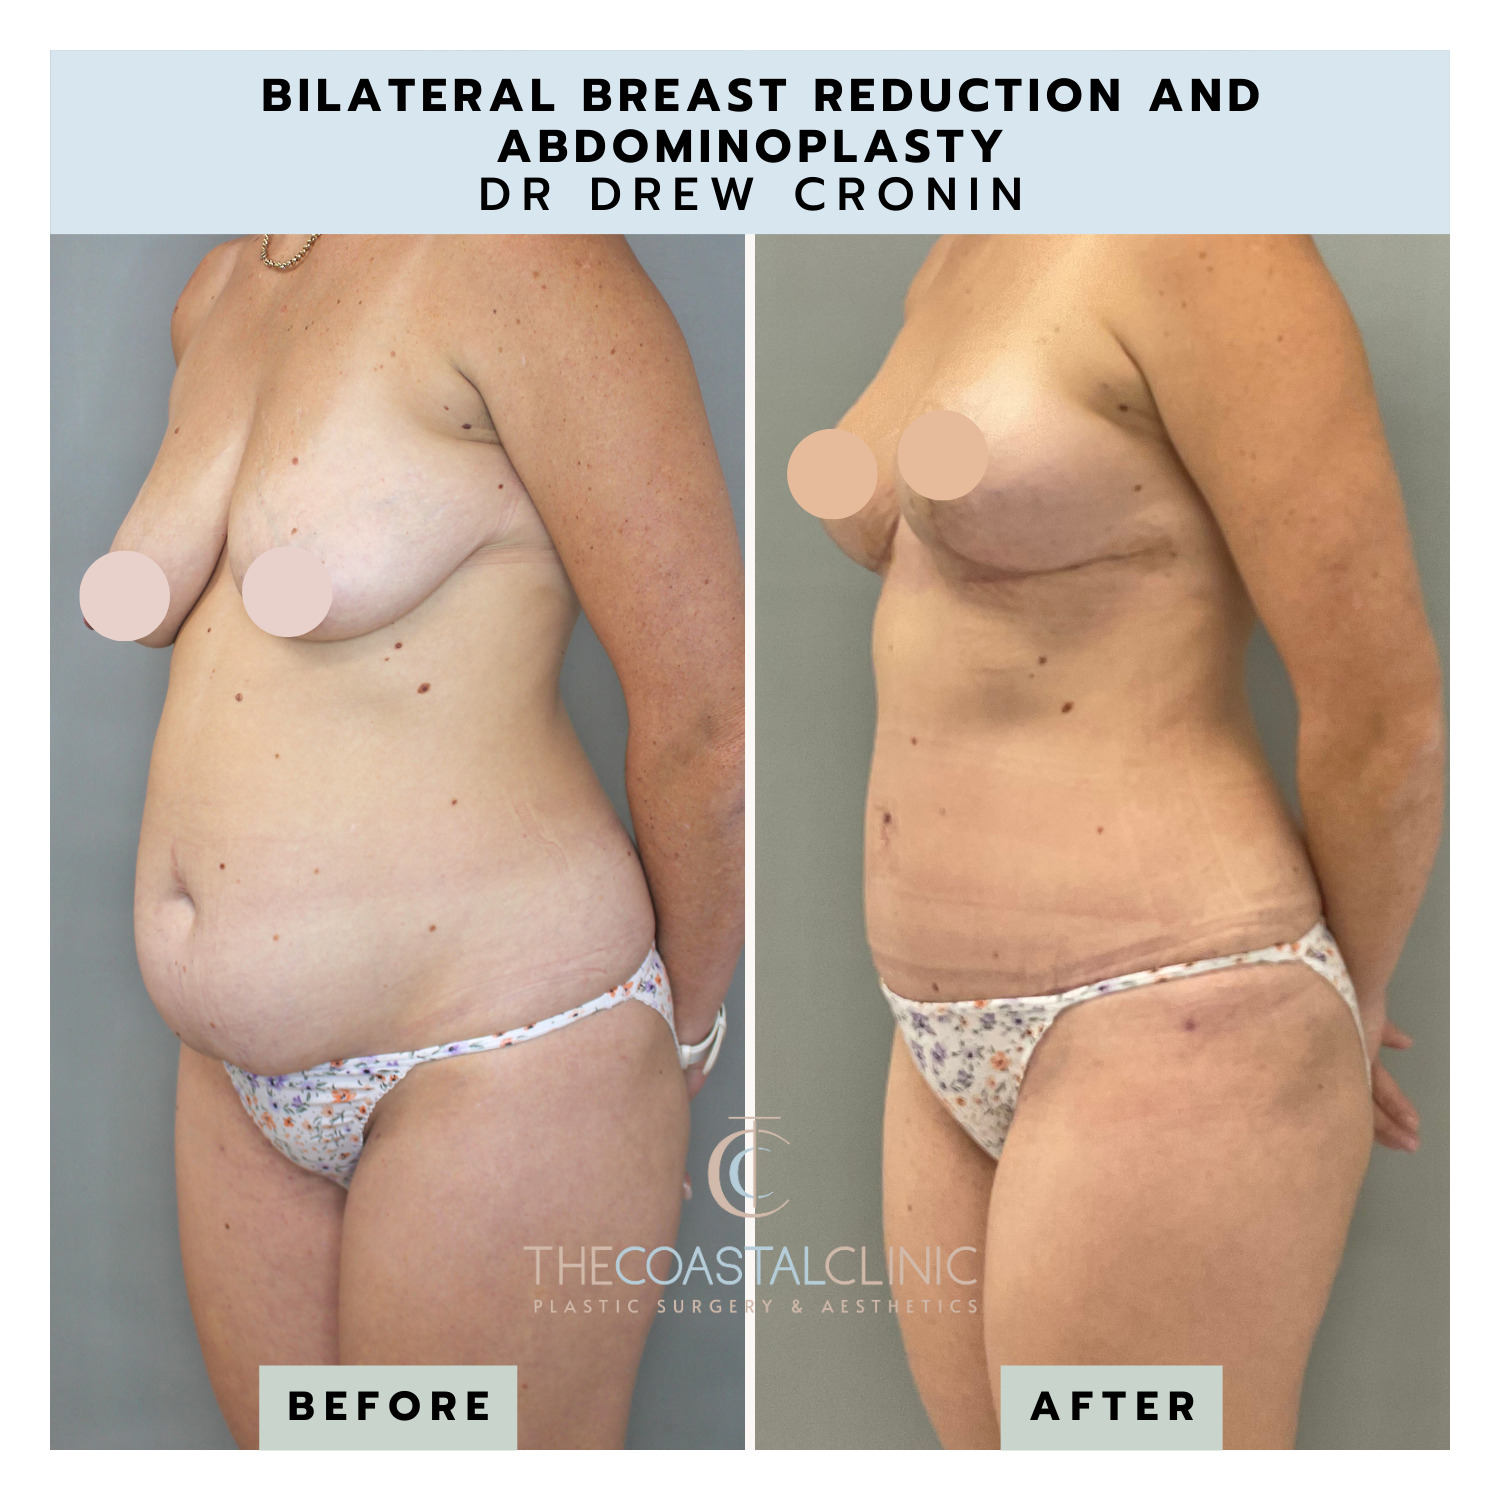 Raleigh and Cary Breast Surgeon - Breast Reduction